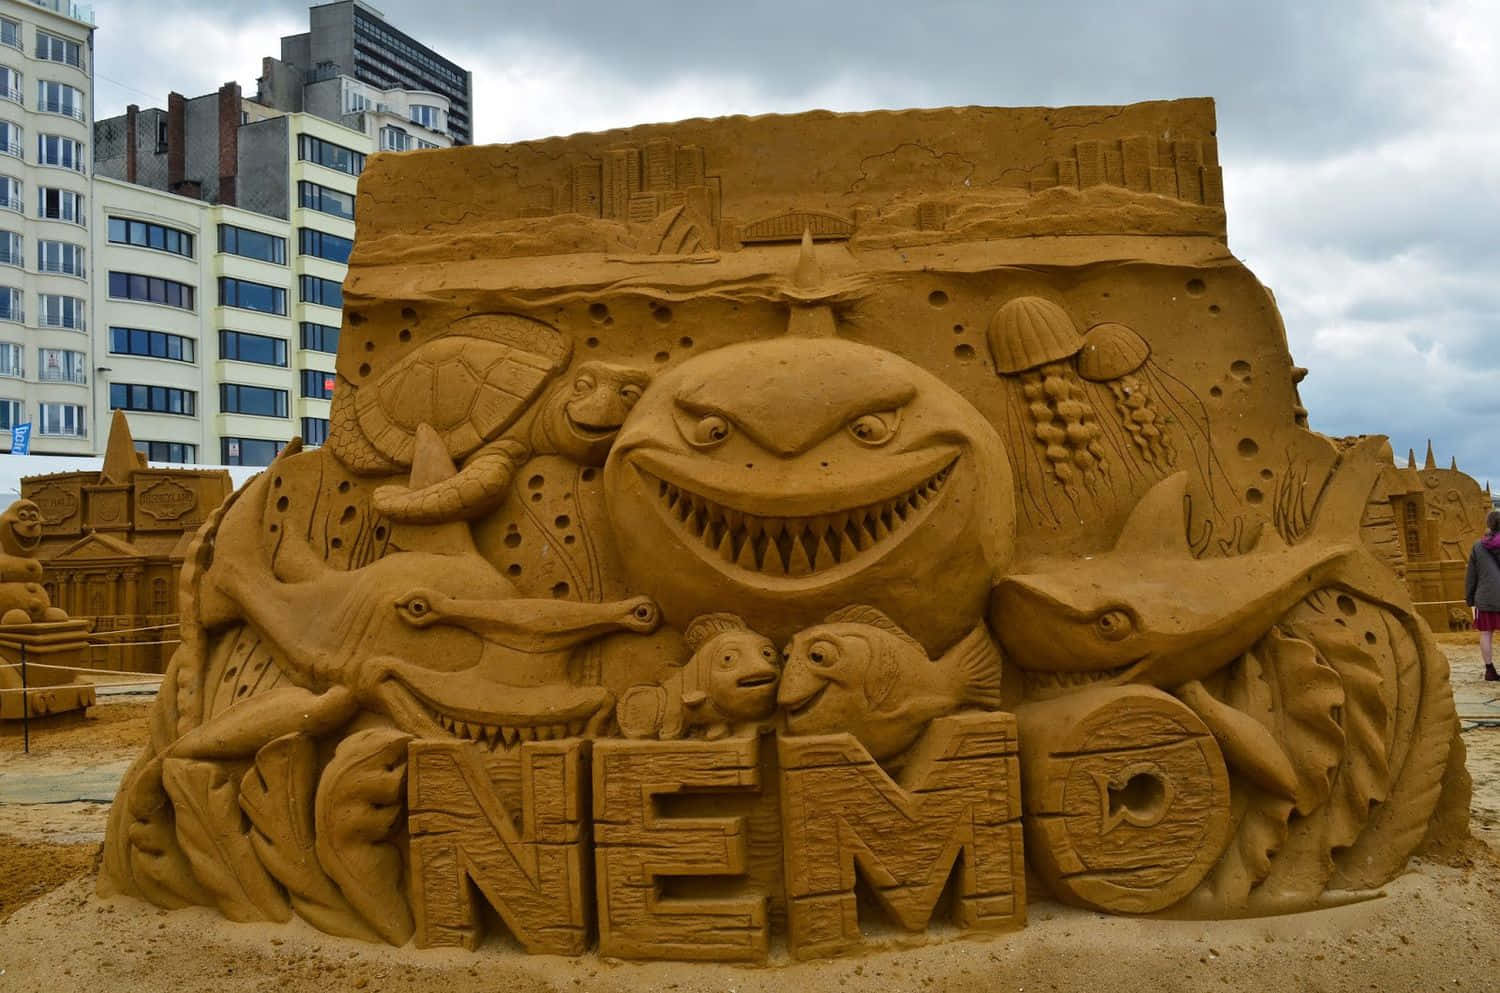 An Intricate and Colorful Sand Art Image